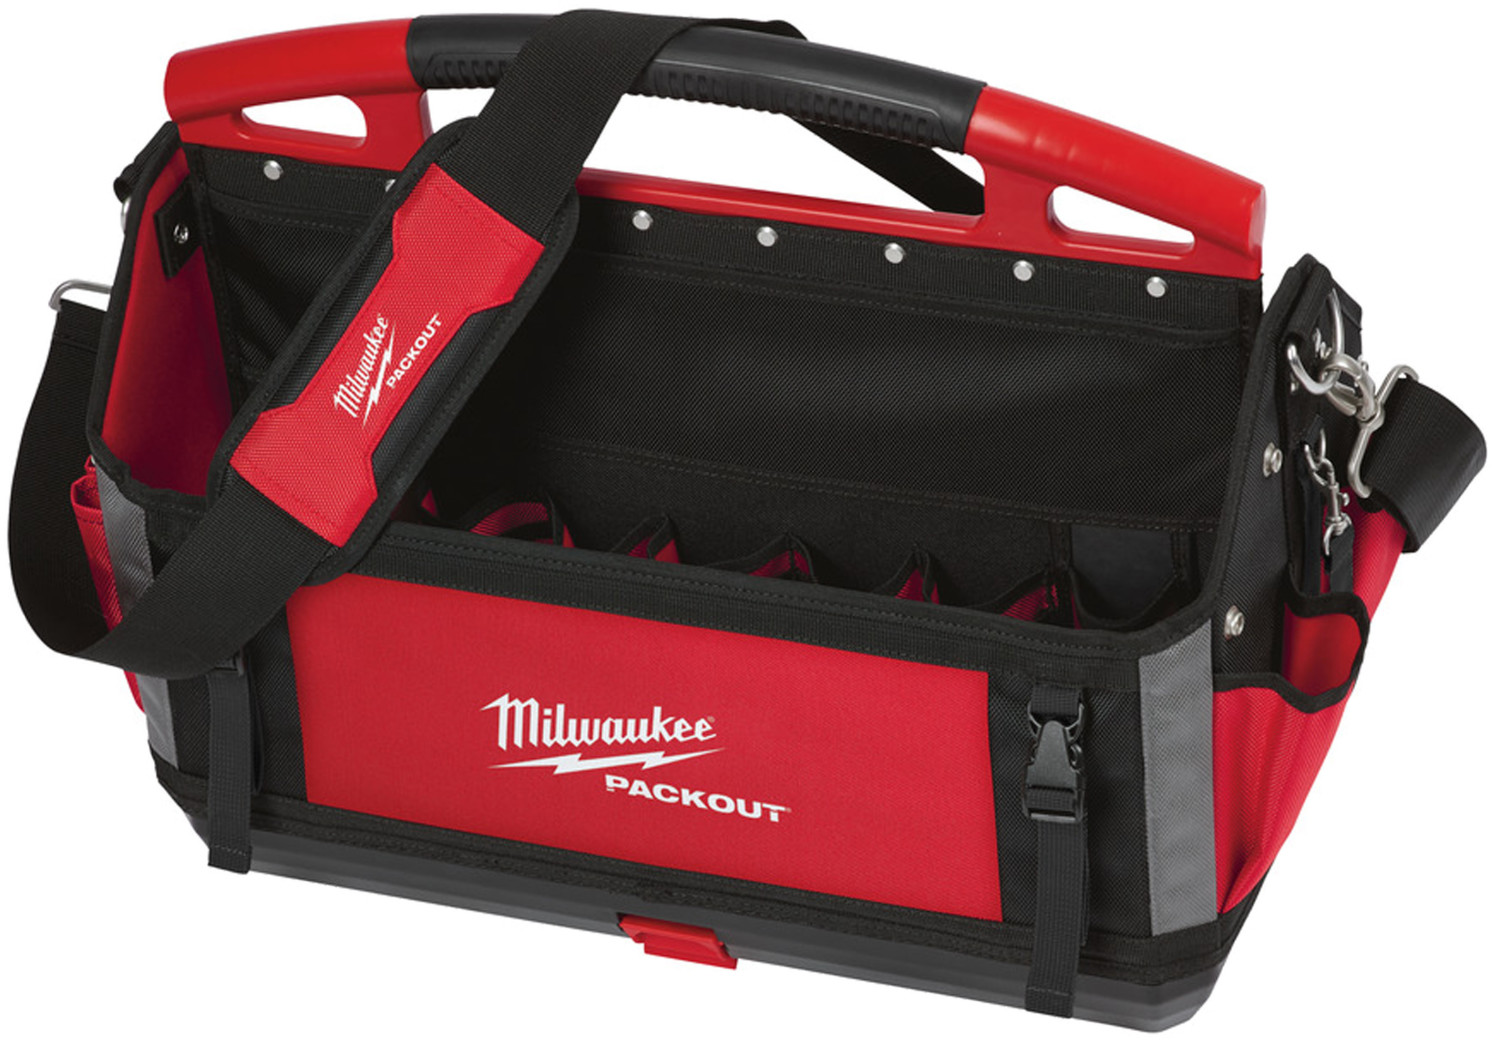 Buy Milwaukee PACKOUT from £60.45 (Today) Best Deals on idealo.co.uk